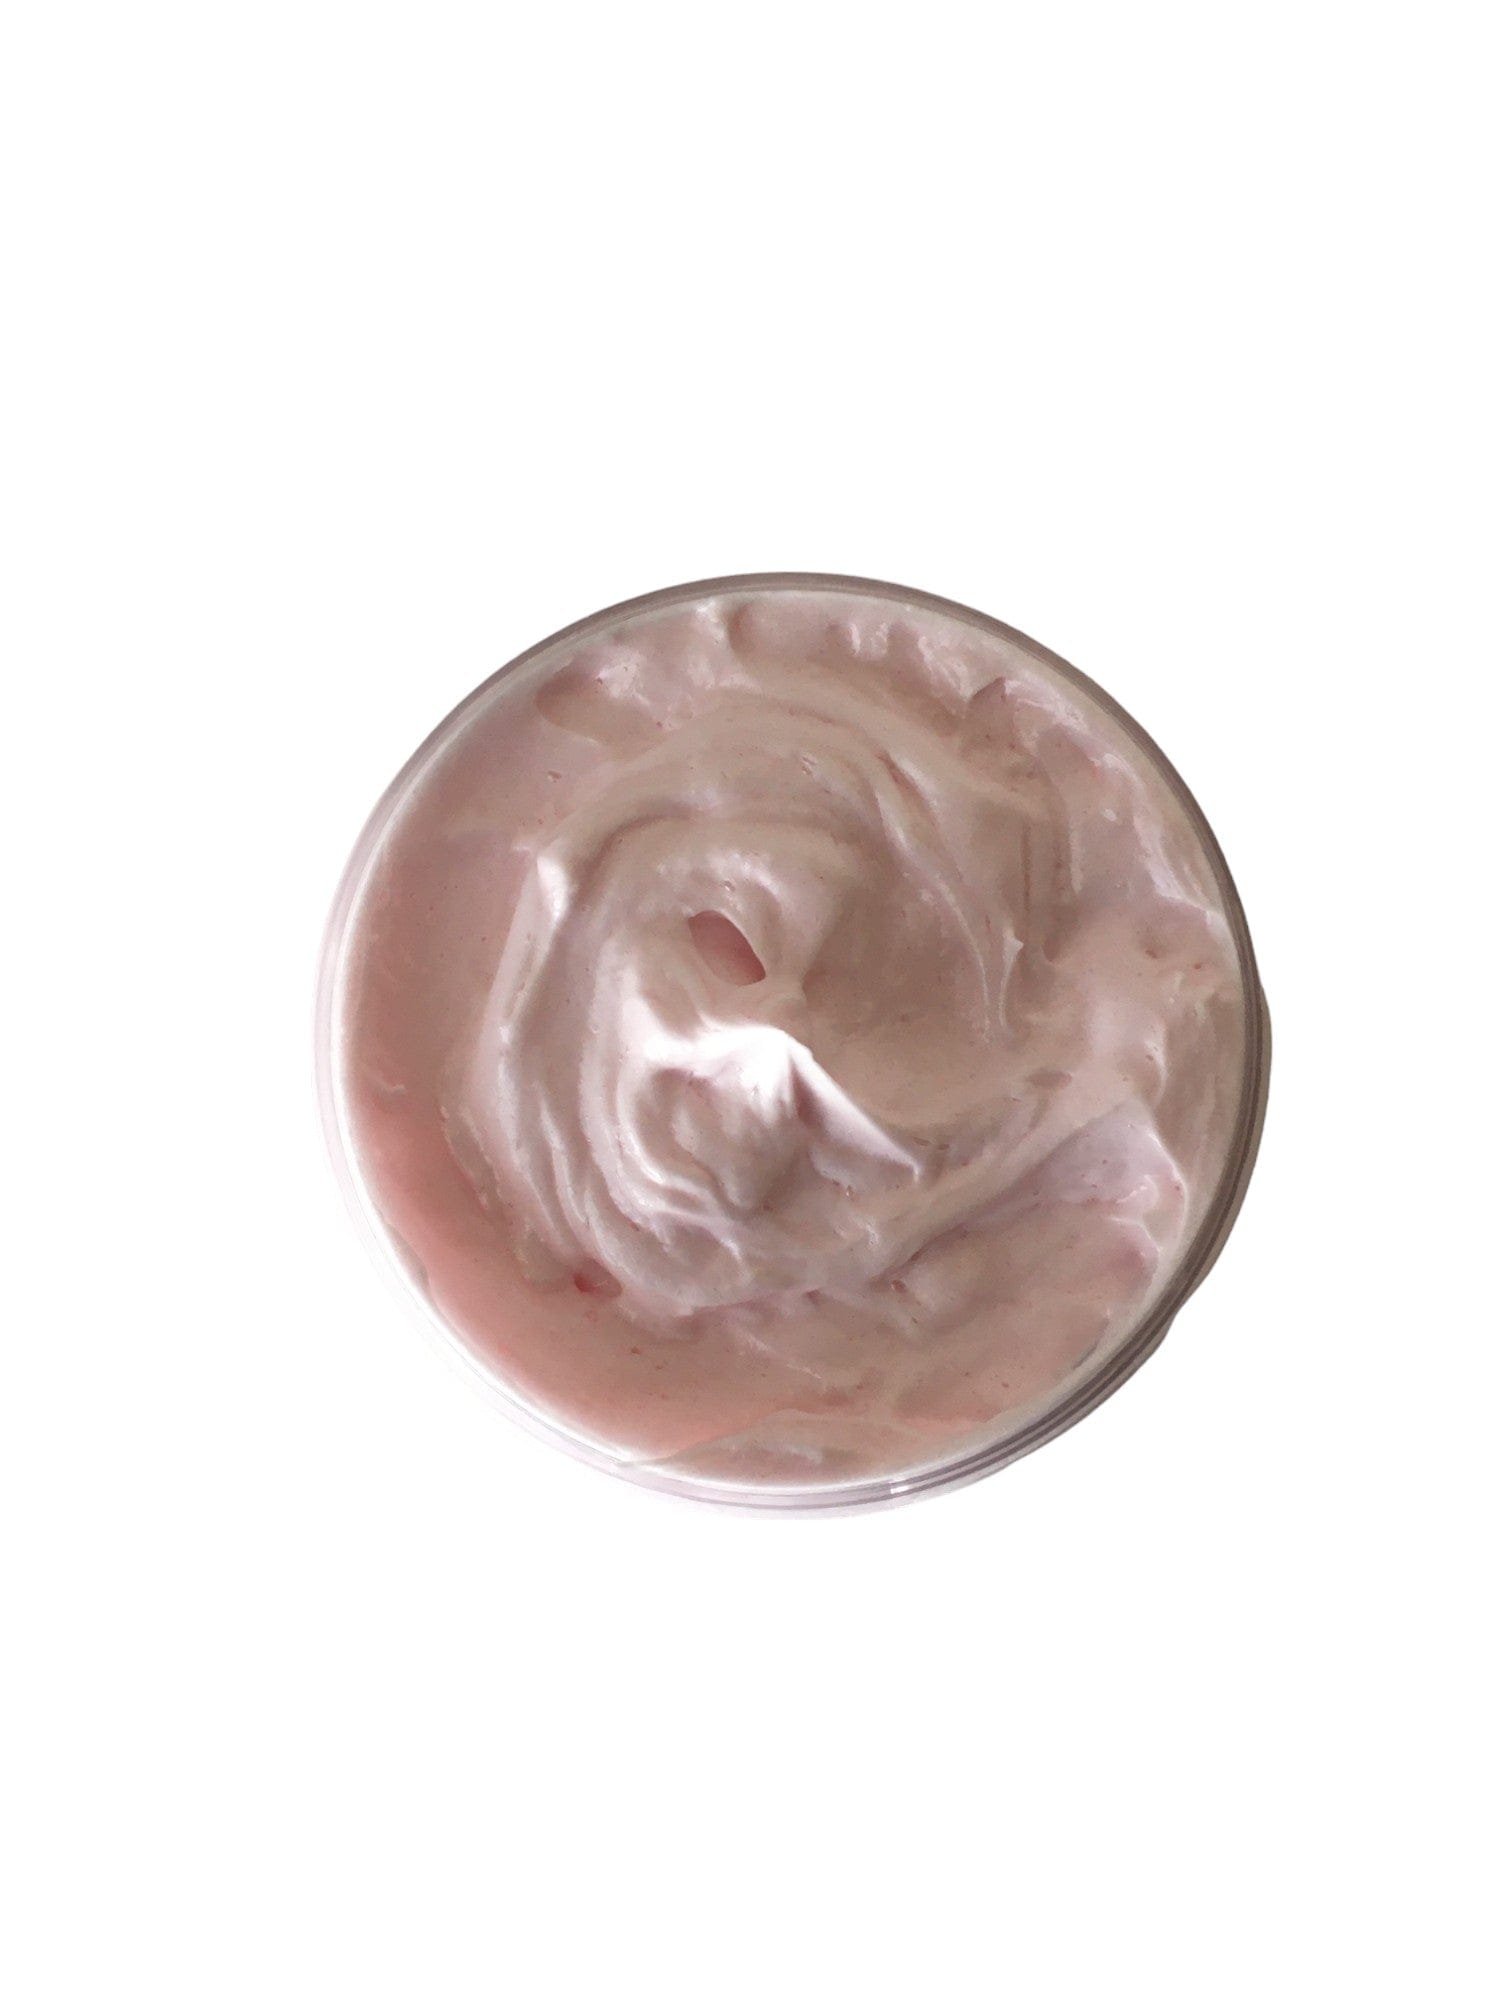 Hibiscus Rose Whipped Soap